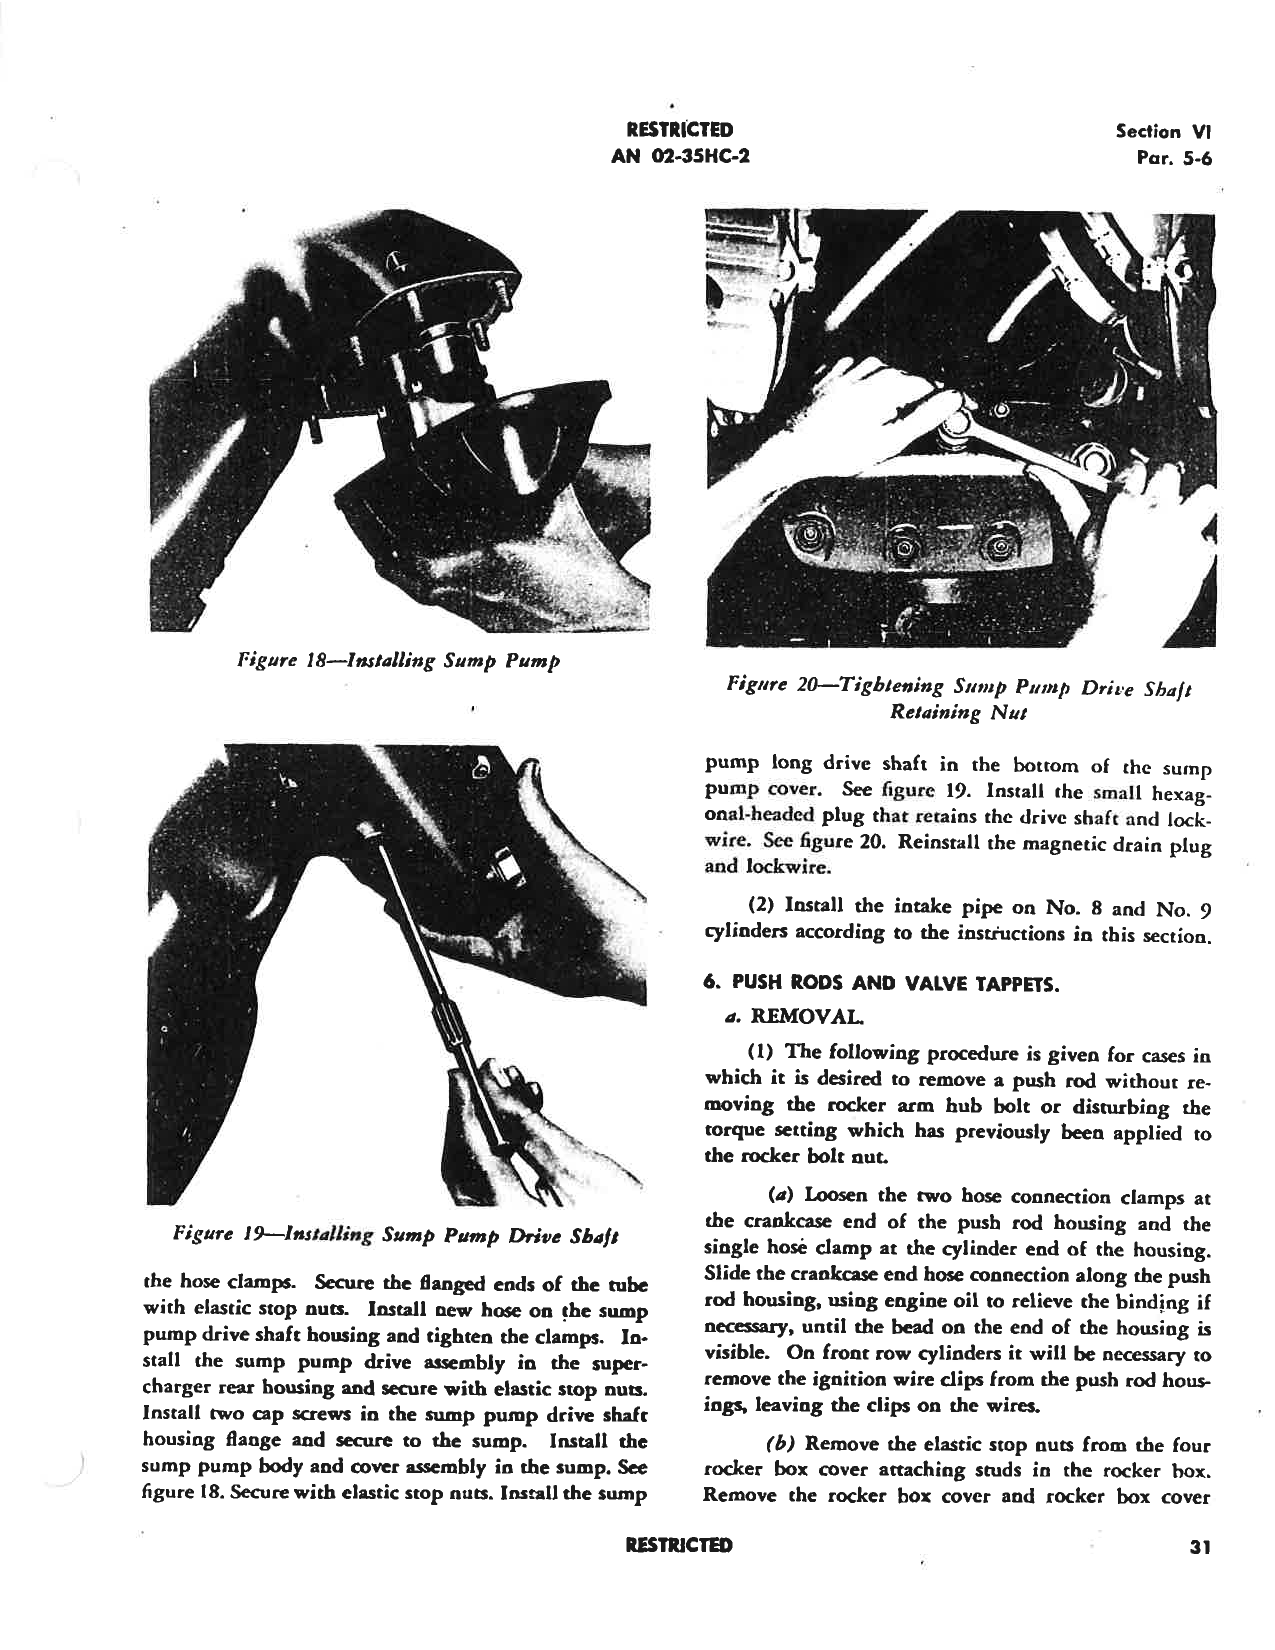 Sample page 38 from AirCorps Library document: Service Instructions - Engine - R-2600-20 & -22